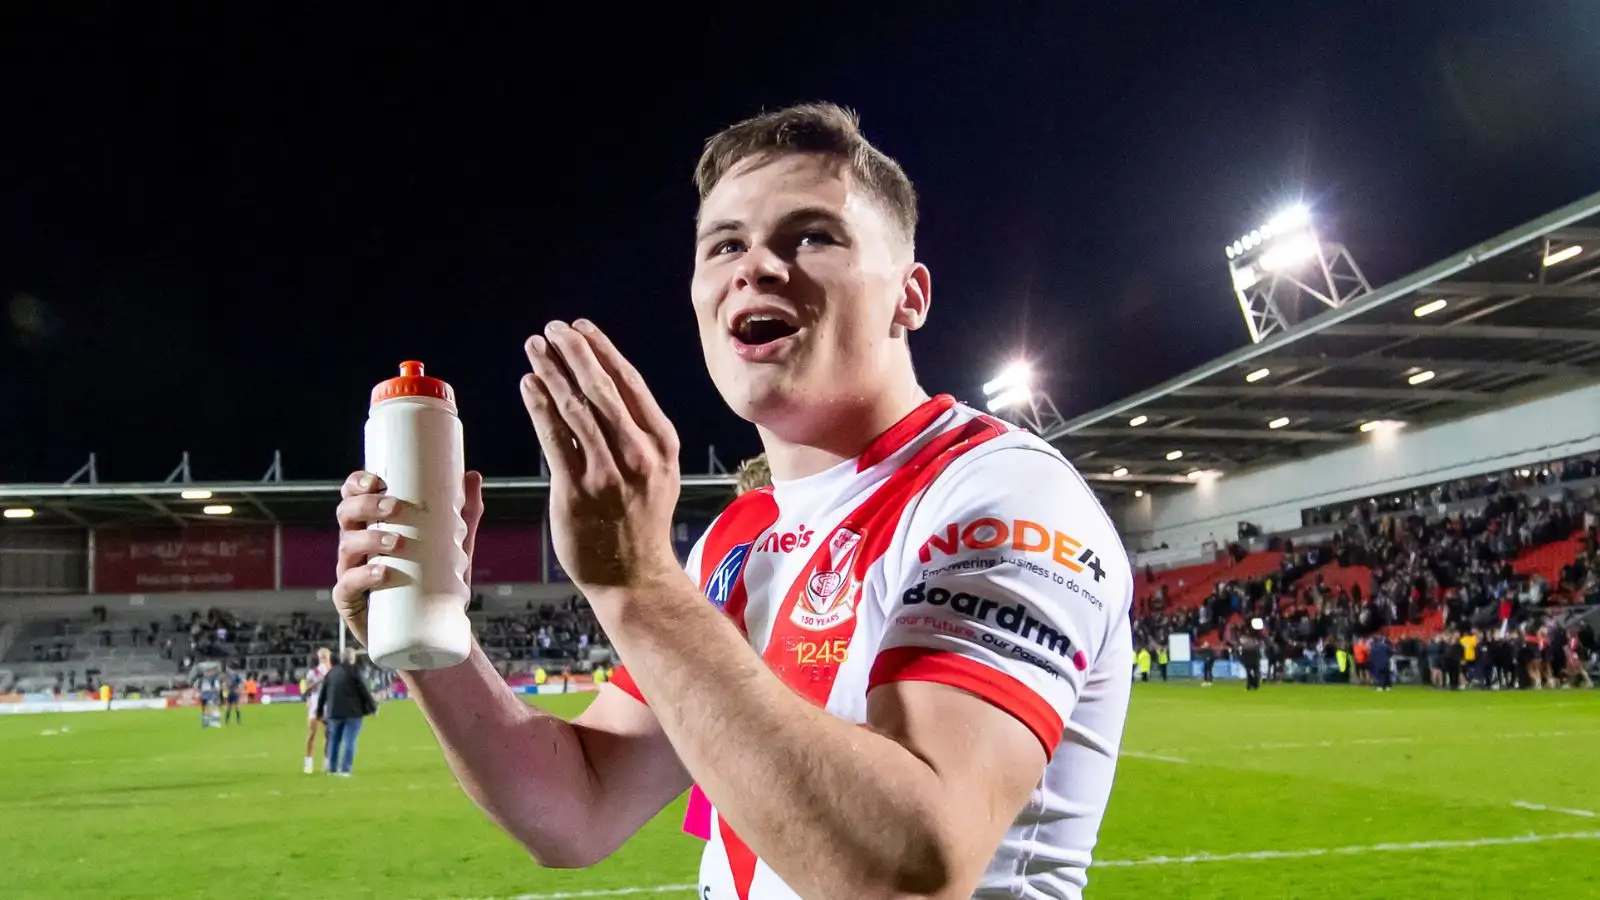 Jack Welsby explains a ‘different approach’ at St Helens ahead of Challenge Cup semi-final